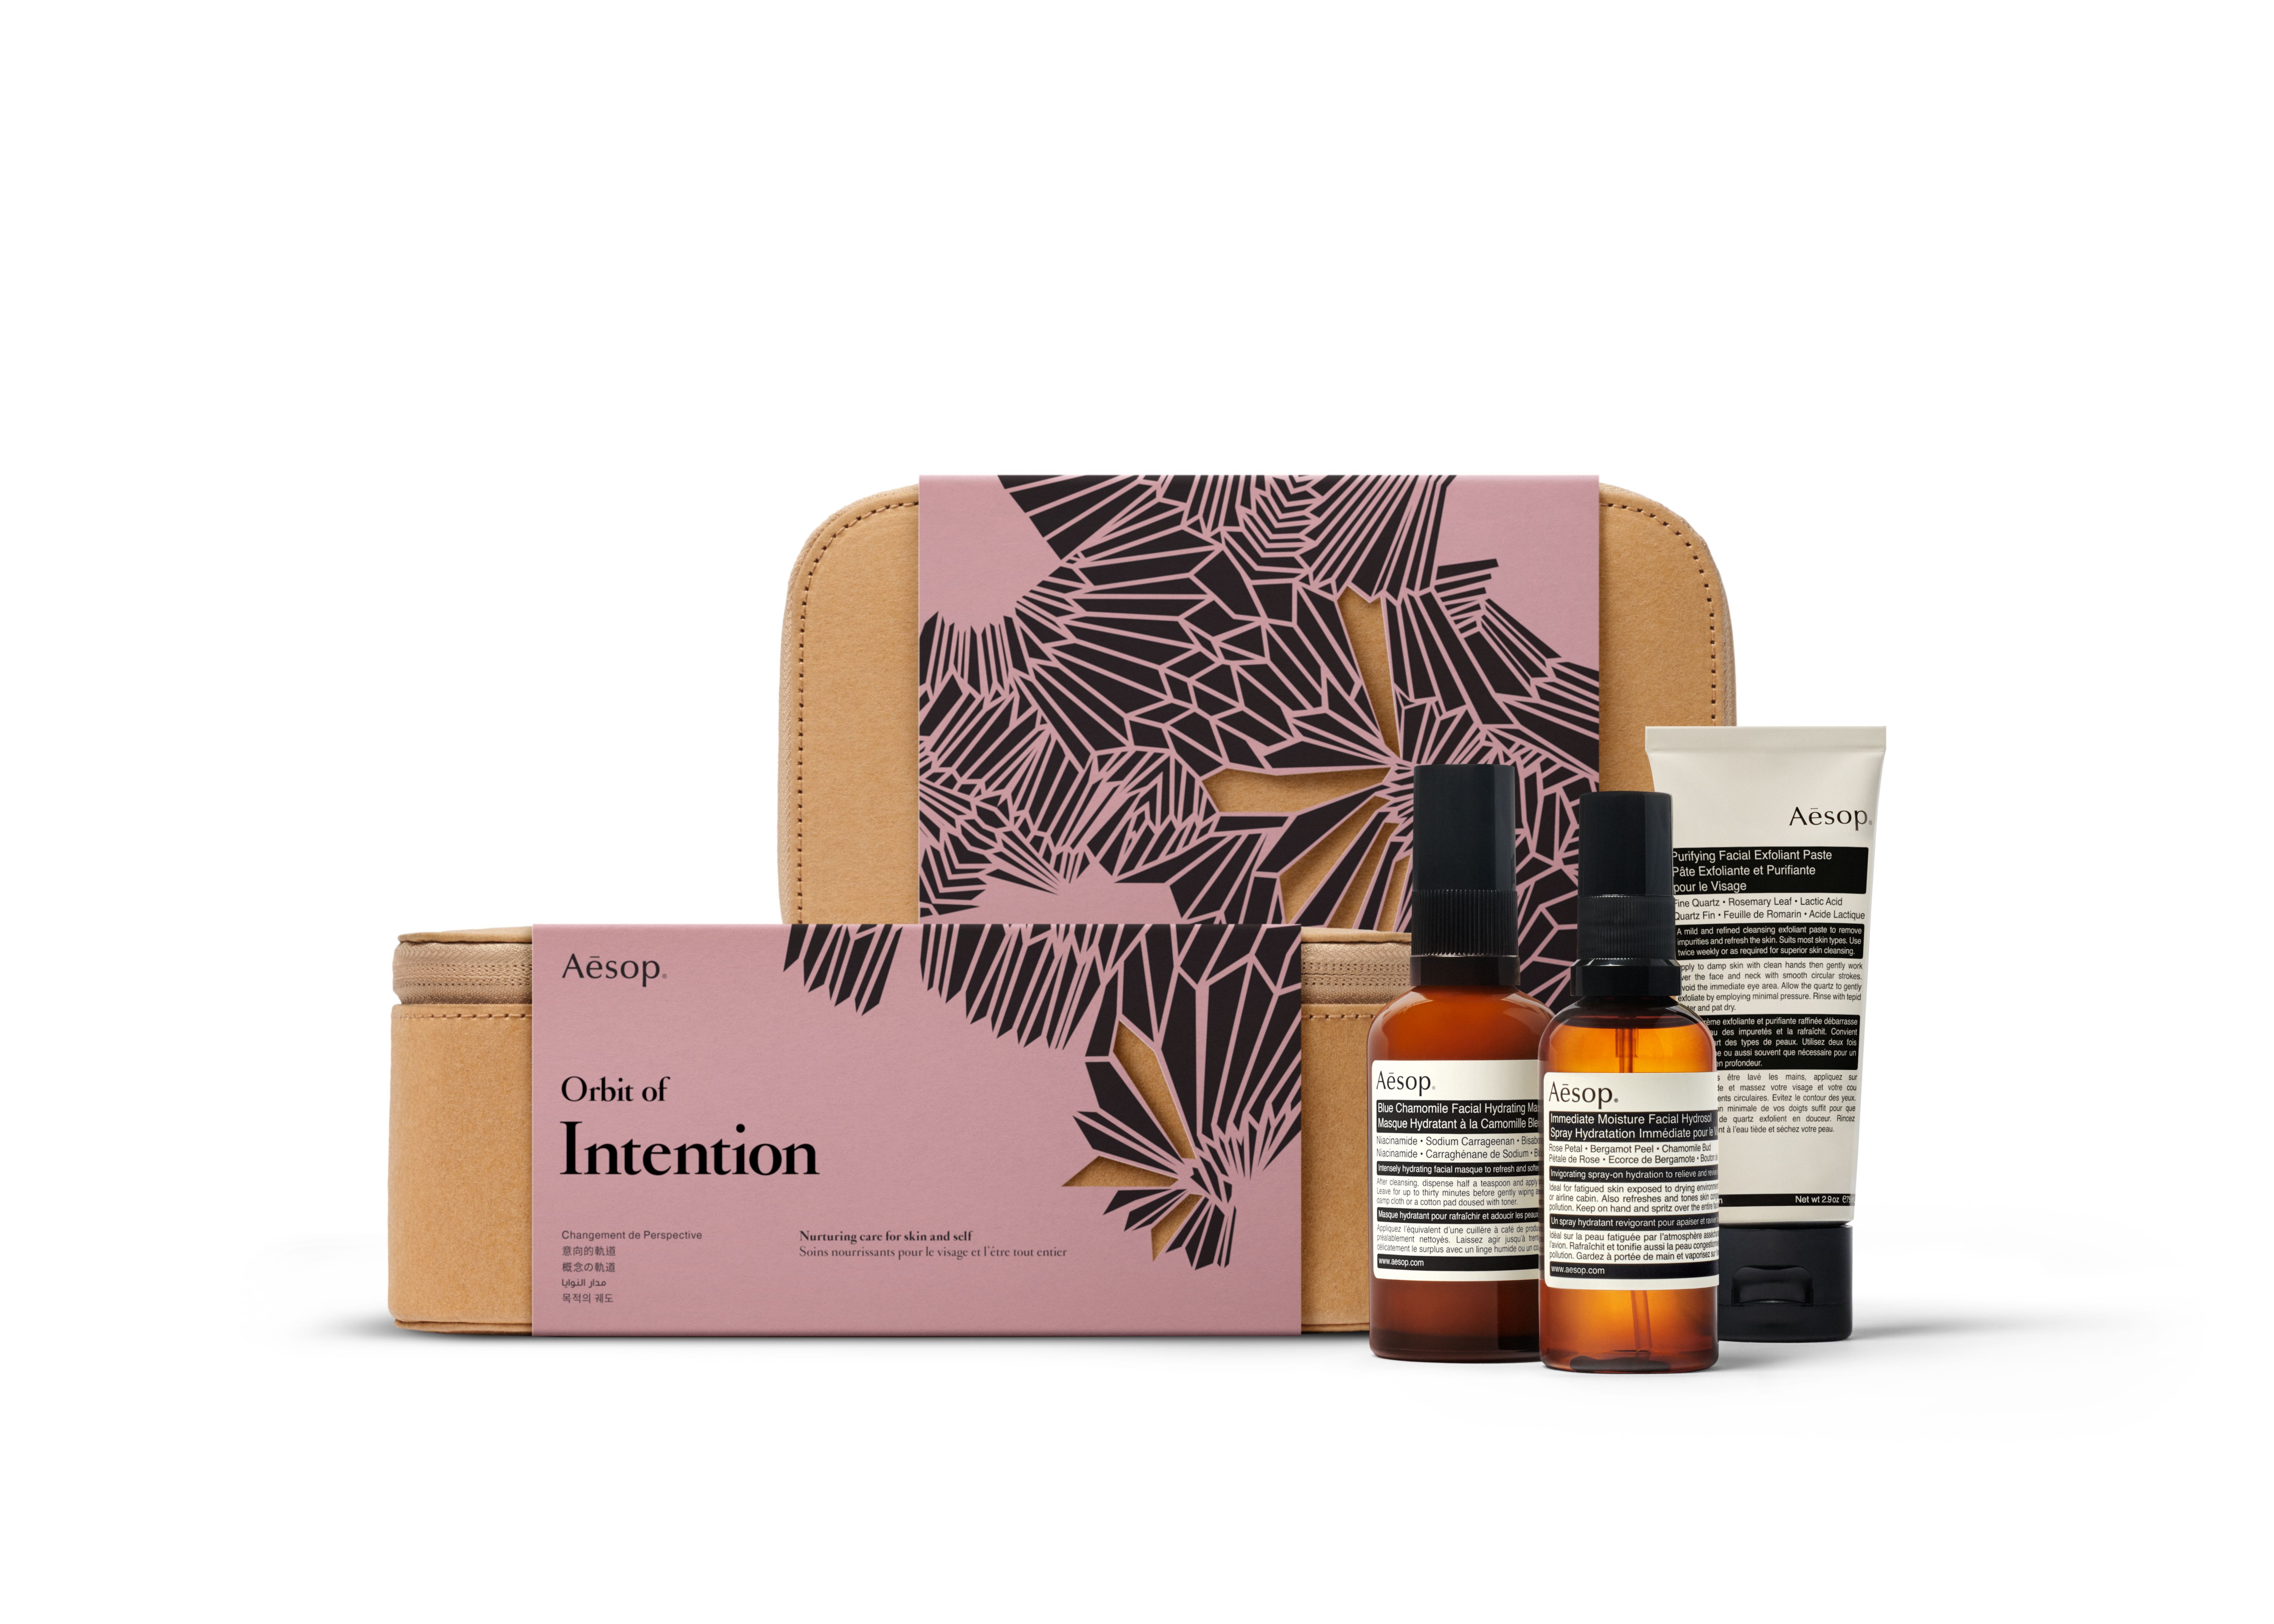 Large JPEG-Aesop Gift Kits 2018-19 Intention x2 with Product